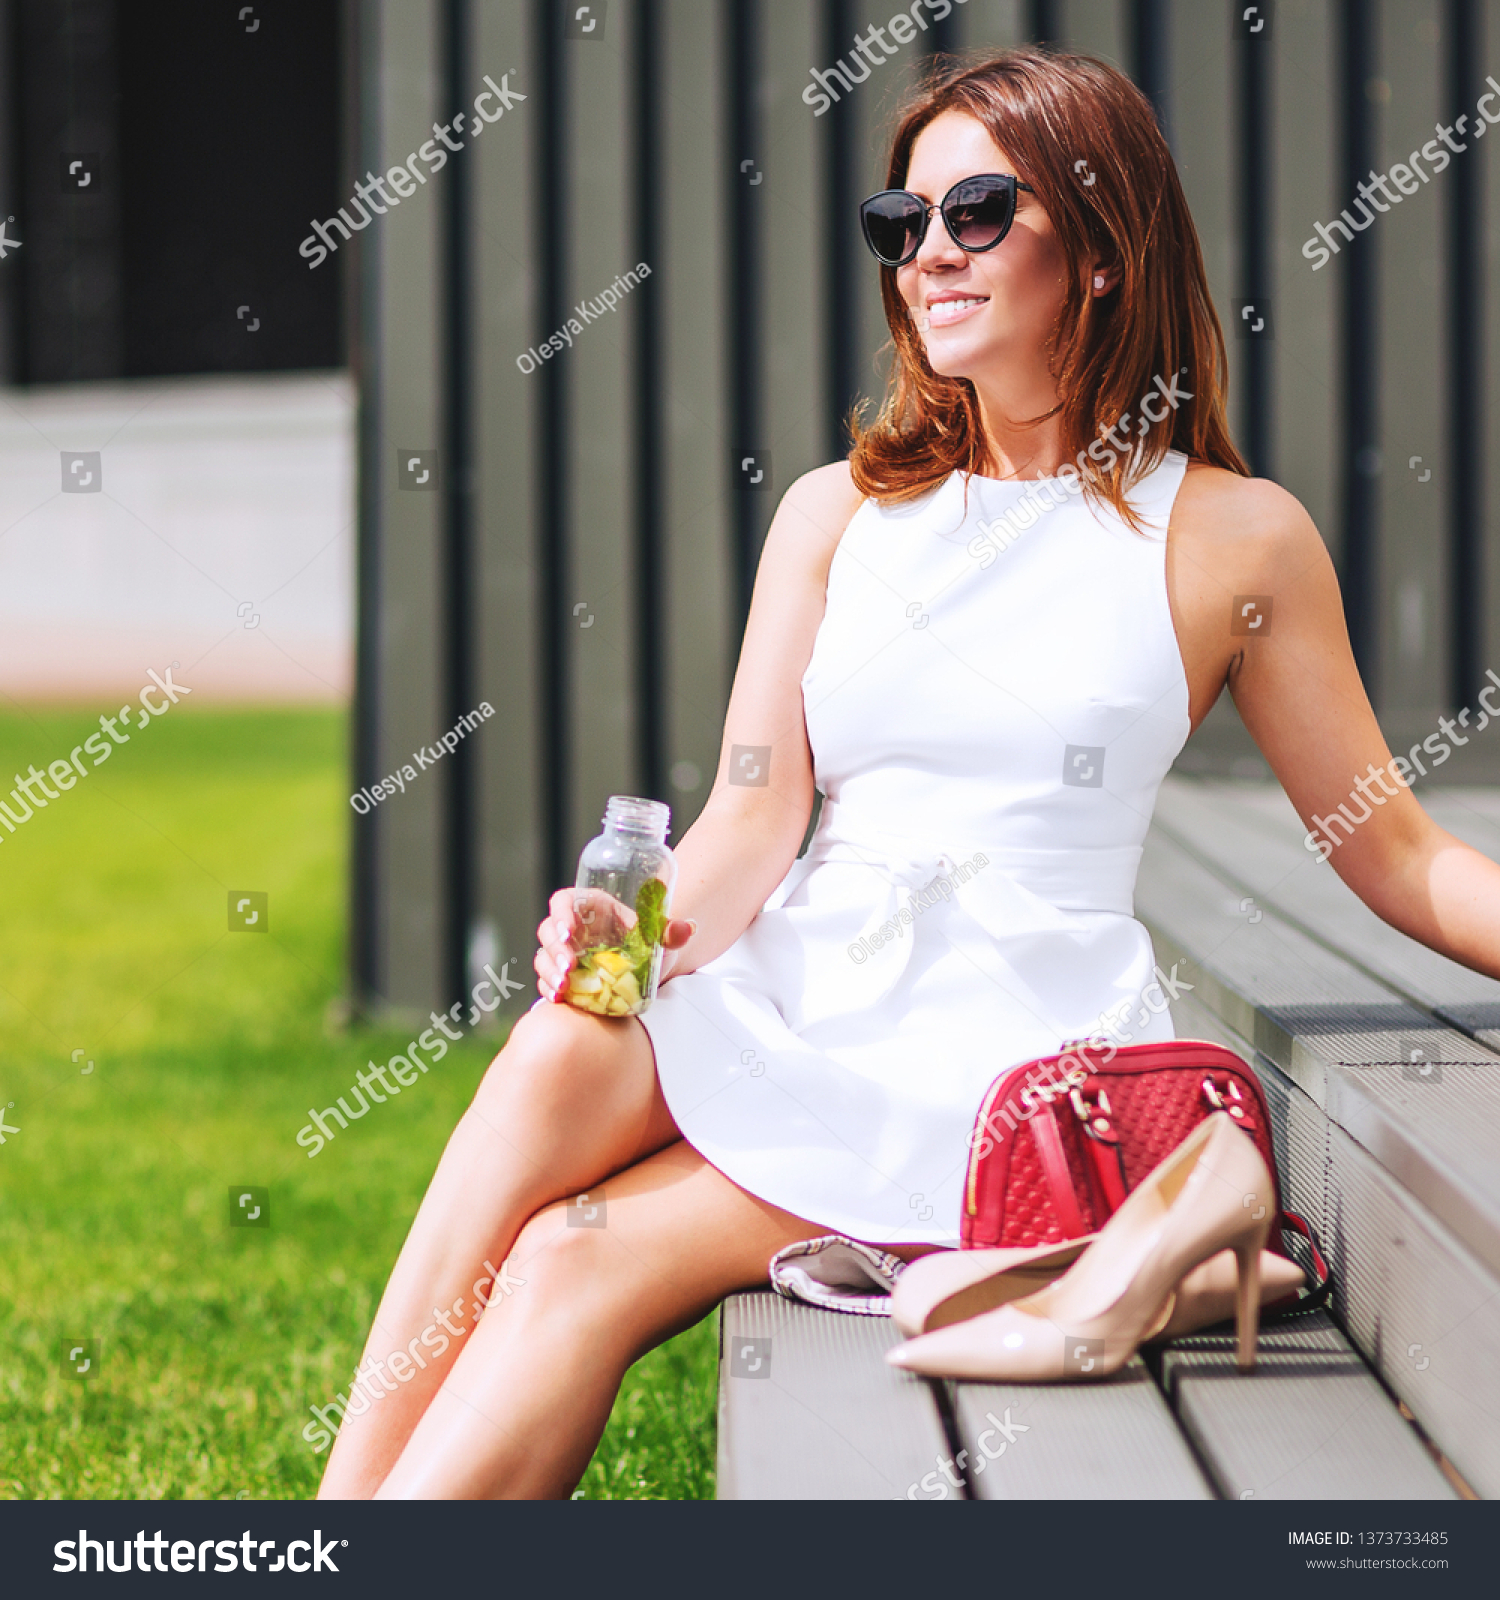 Outdoors lifestyle fashion portrait of pretty red hair girl sitting on the bench. Drinking natural lemonade. Enjoing sunny day, resting. Wearing stylish white dress, sunglass. Shoeless. Rest for feet #1373733485